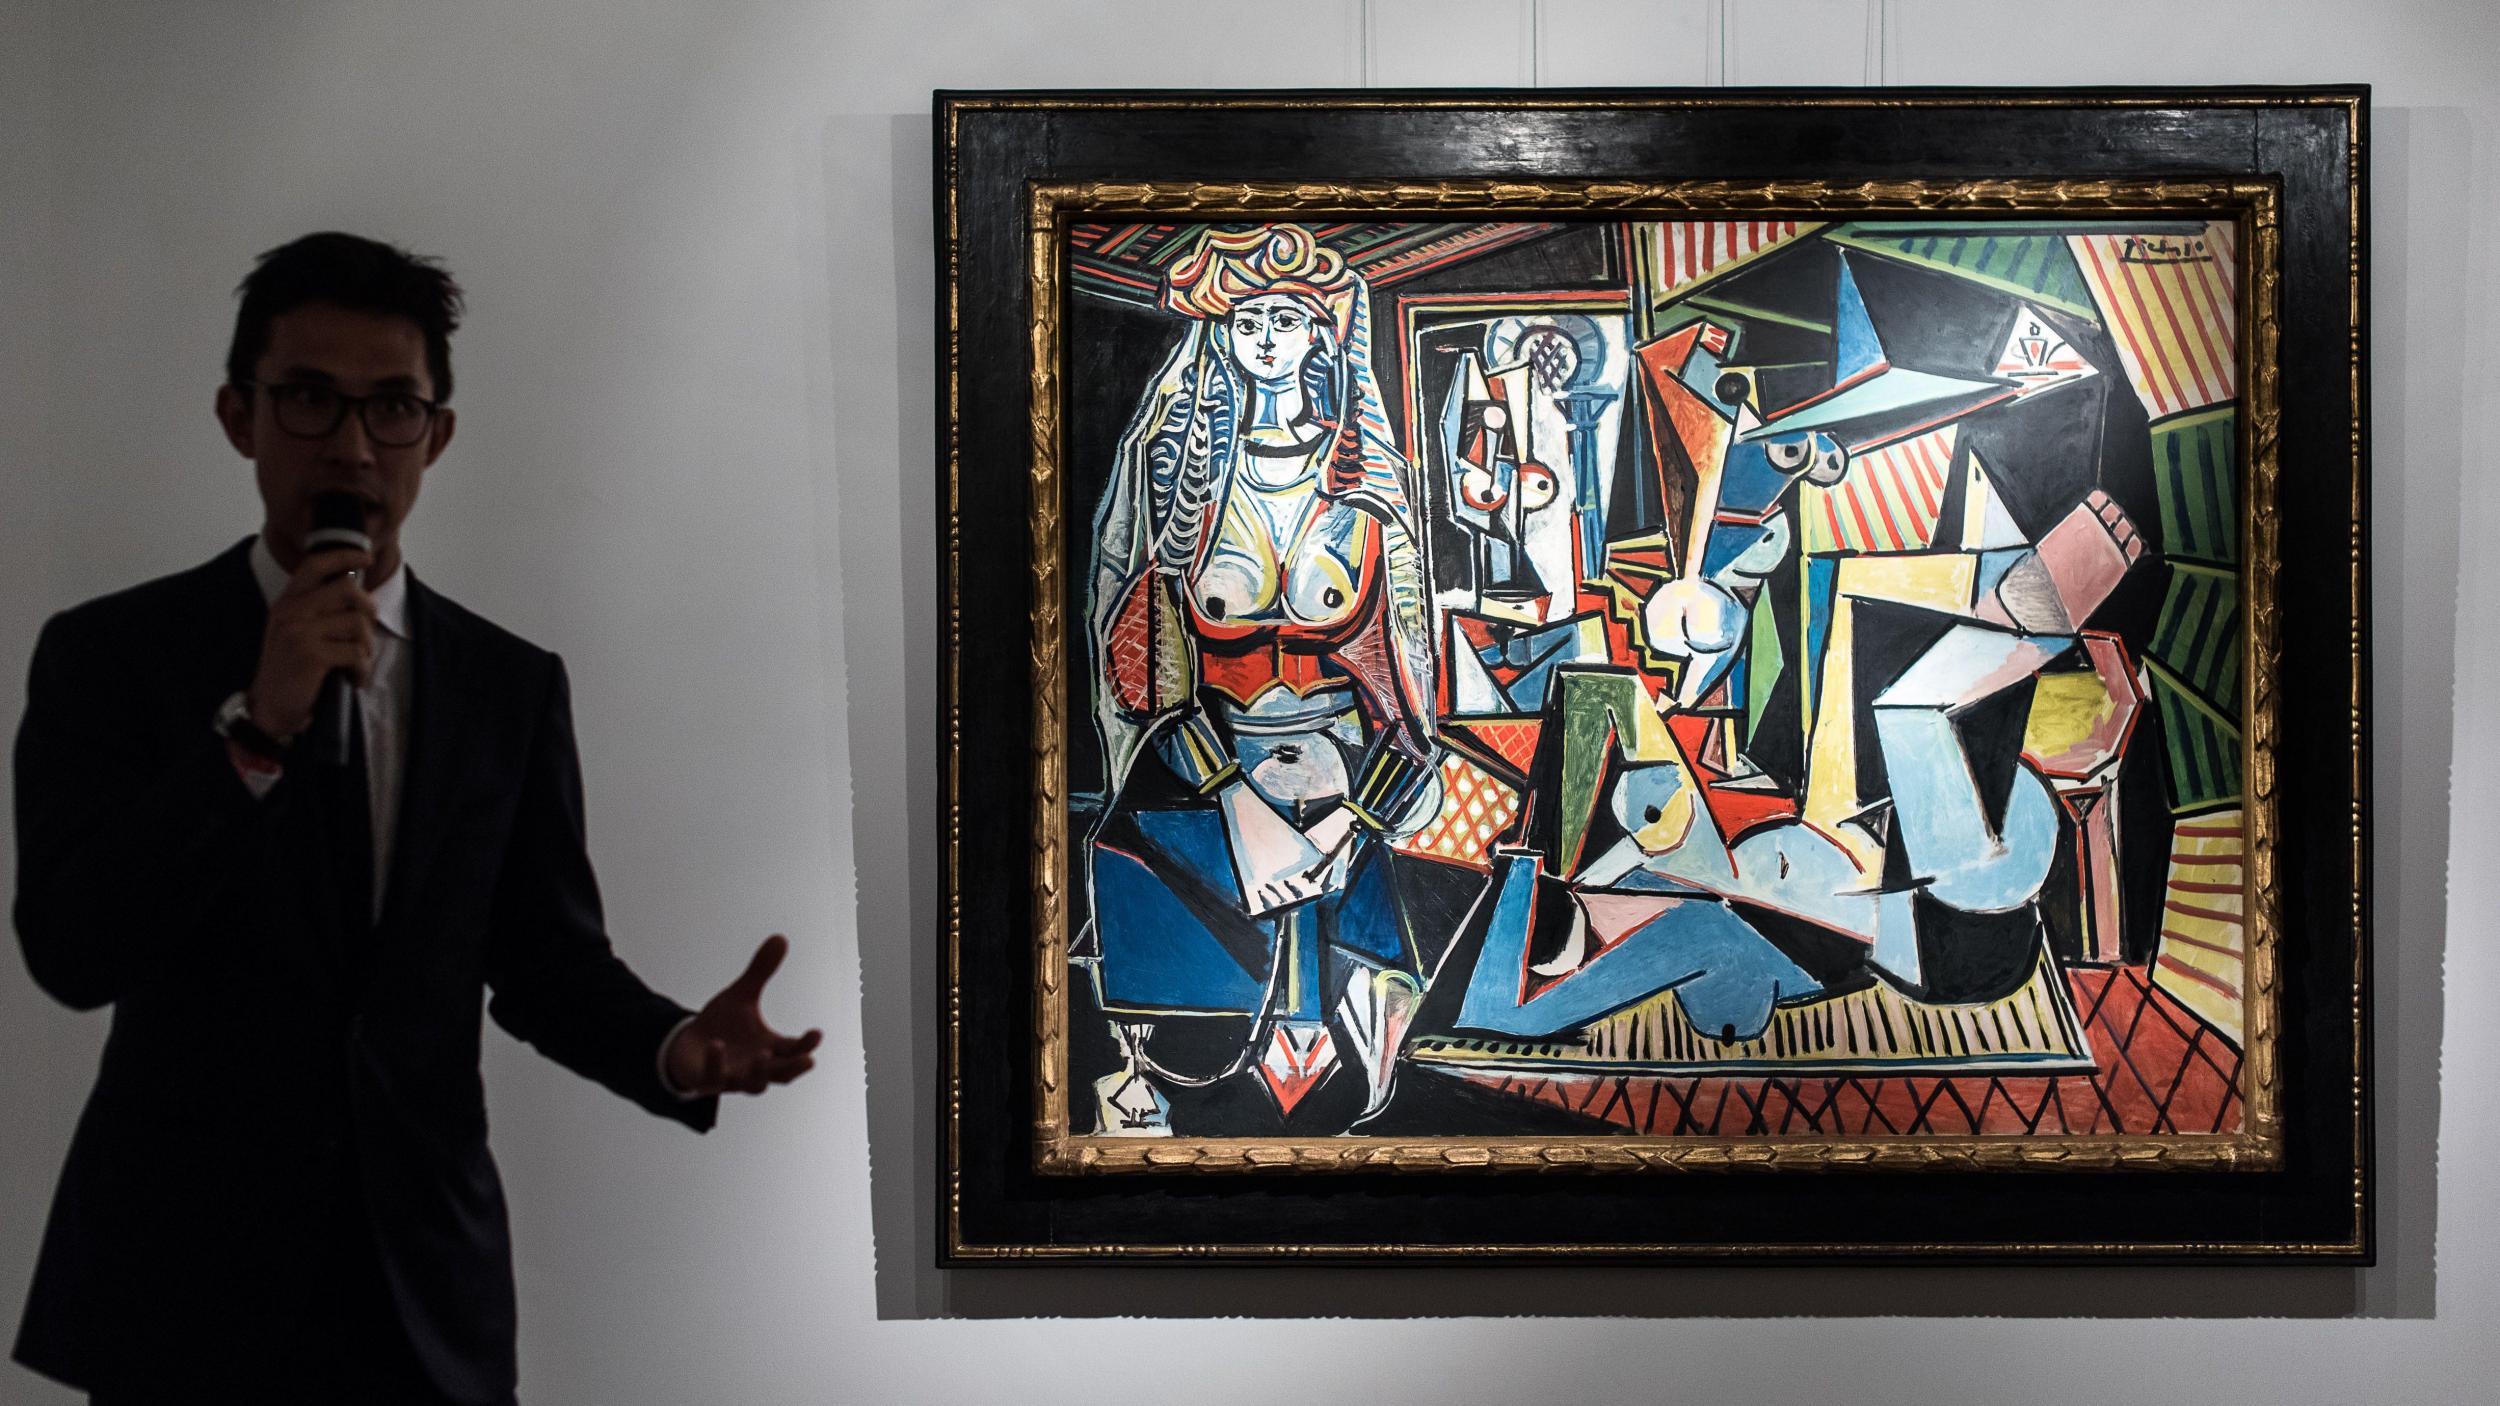 ‘The Women of Algiers’ by Picasso sold for $179.4m